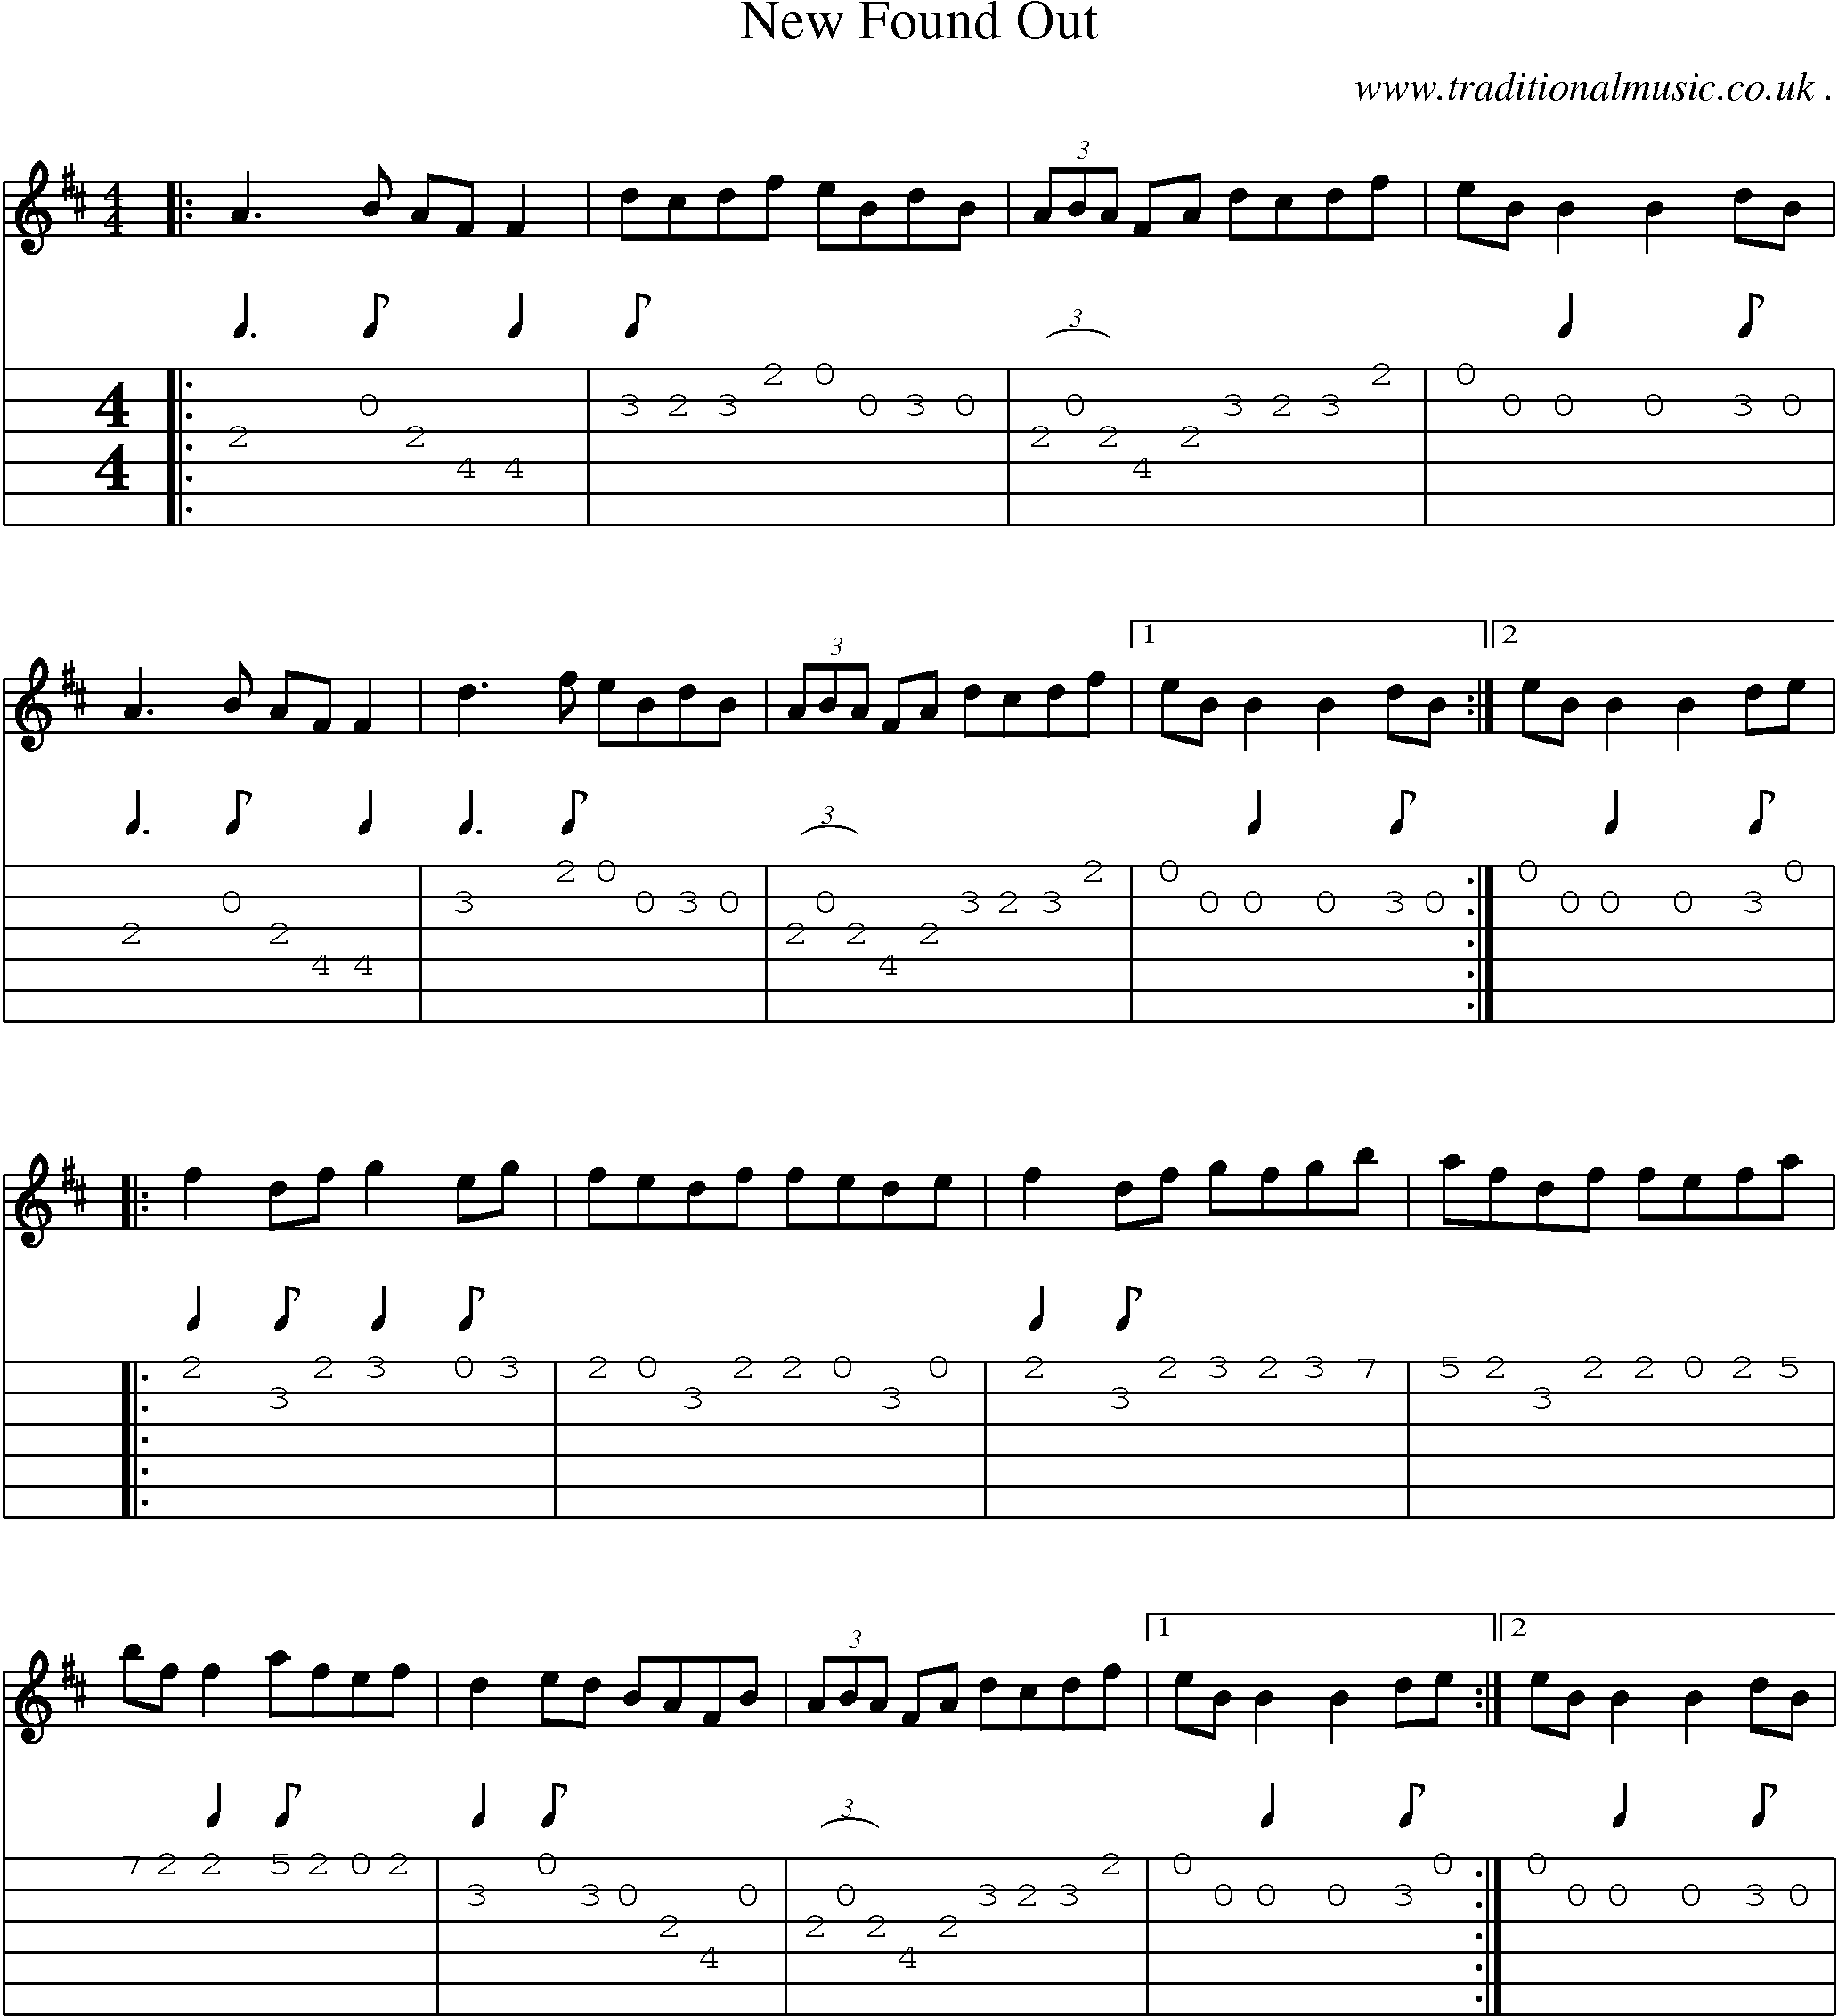 Sheet-Music and Guitar Tabs for New Found Out